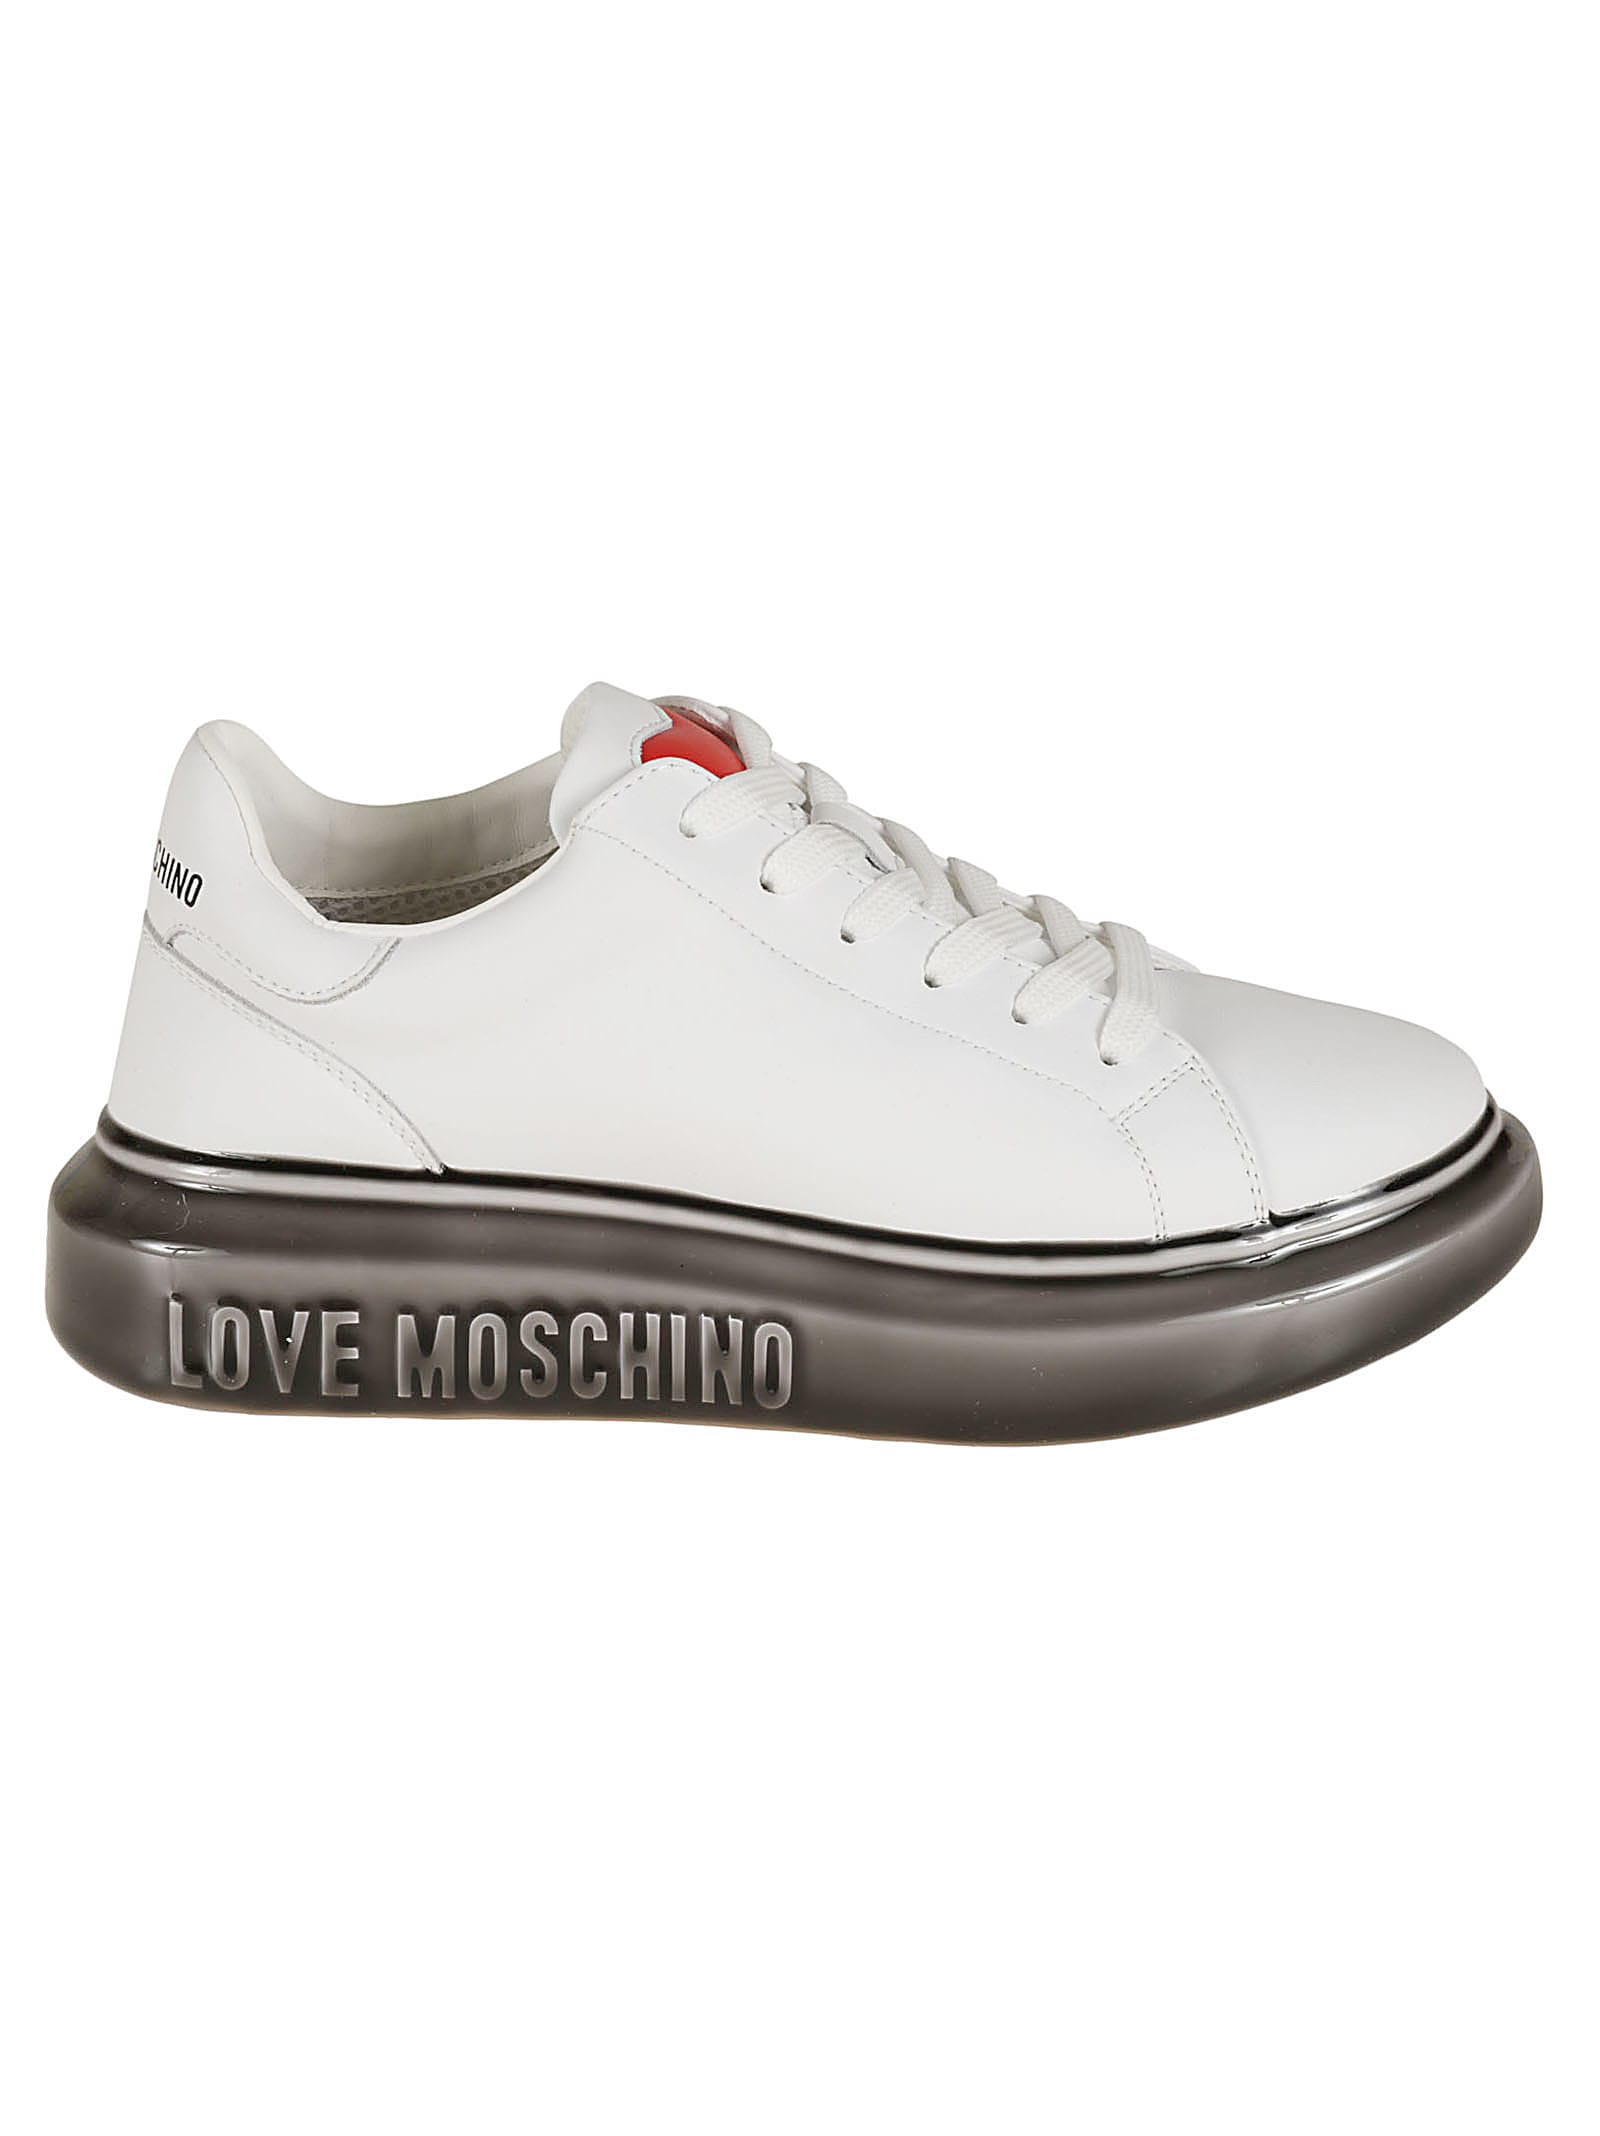 Love Moschino Logo Sole Sneakers